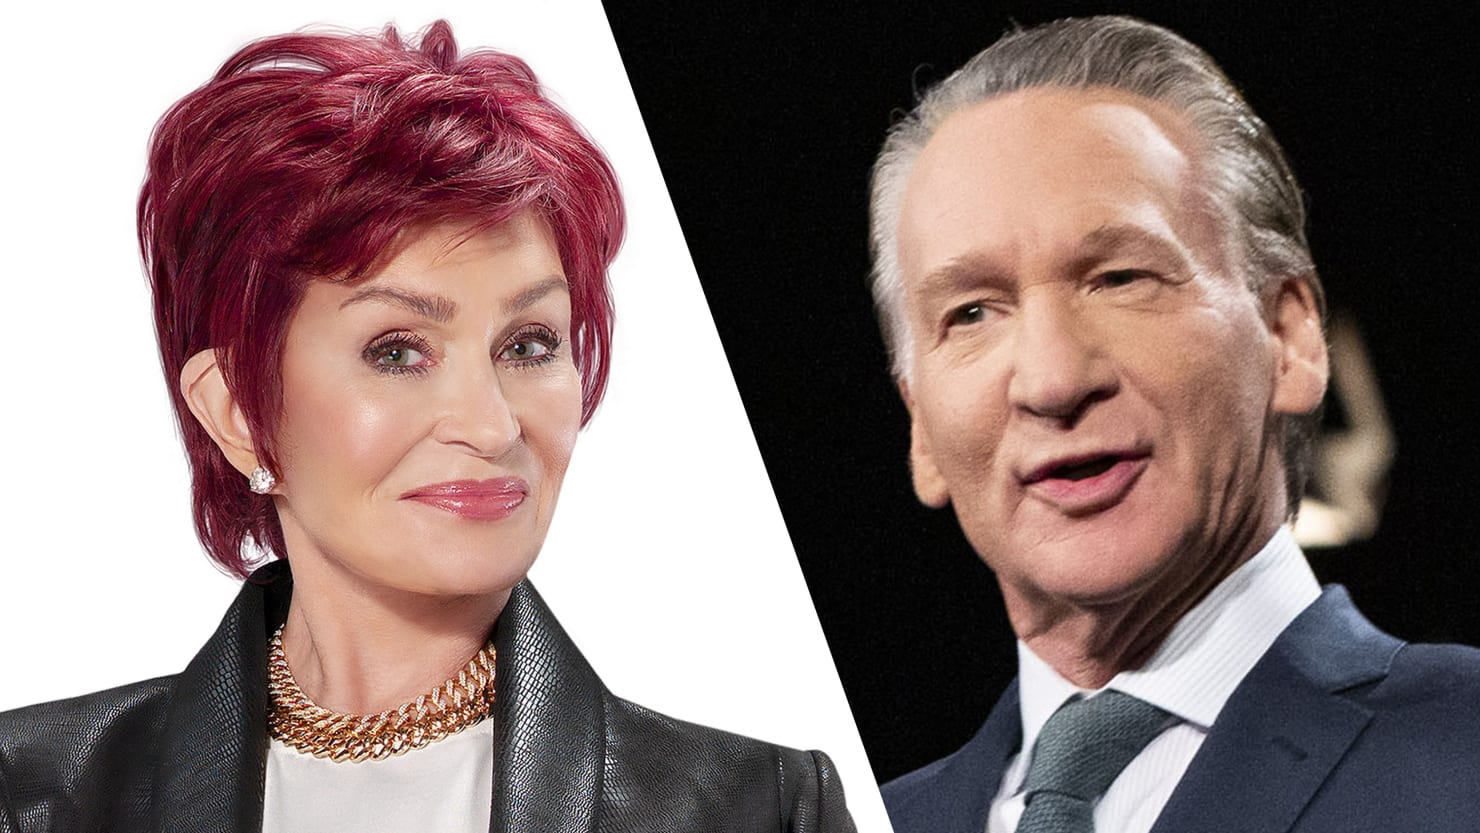 Sharon Osbourne and Bill Maher Whine about canceling culture in “real time”